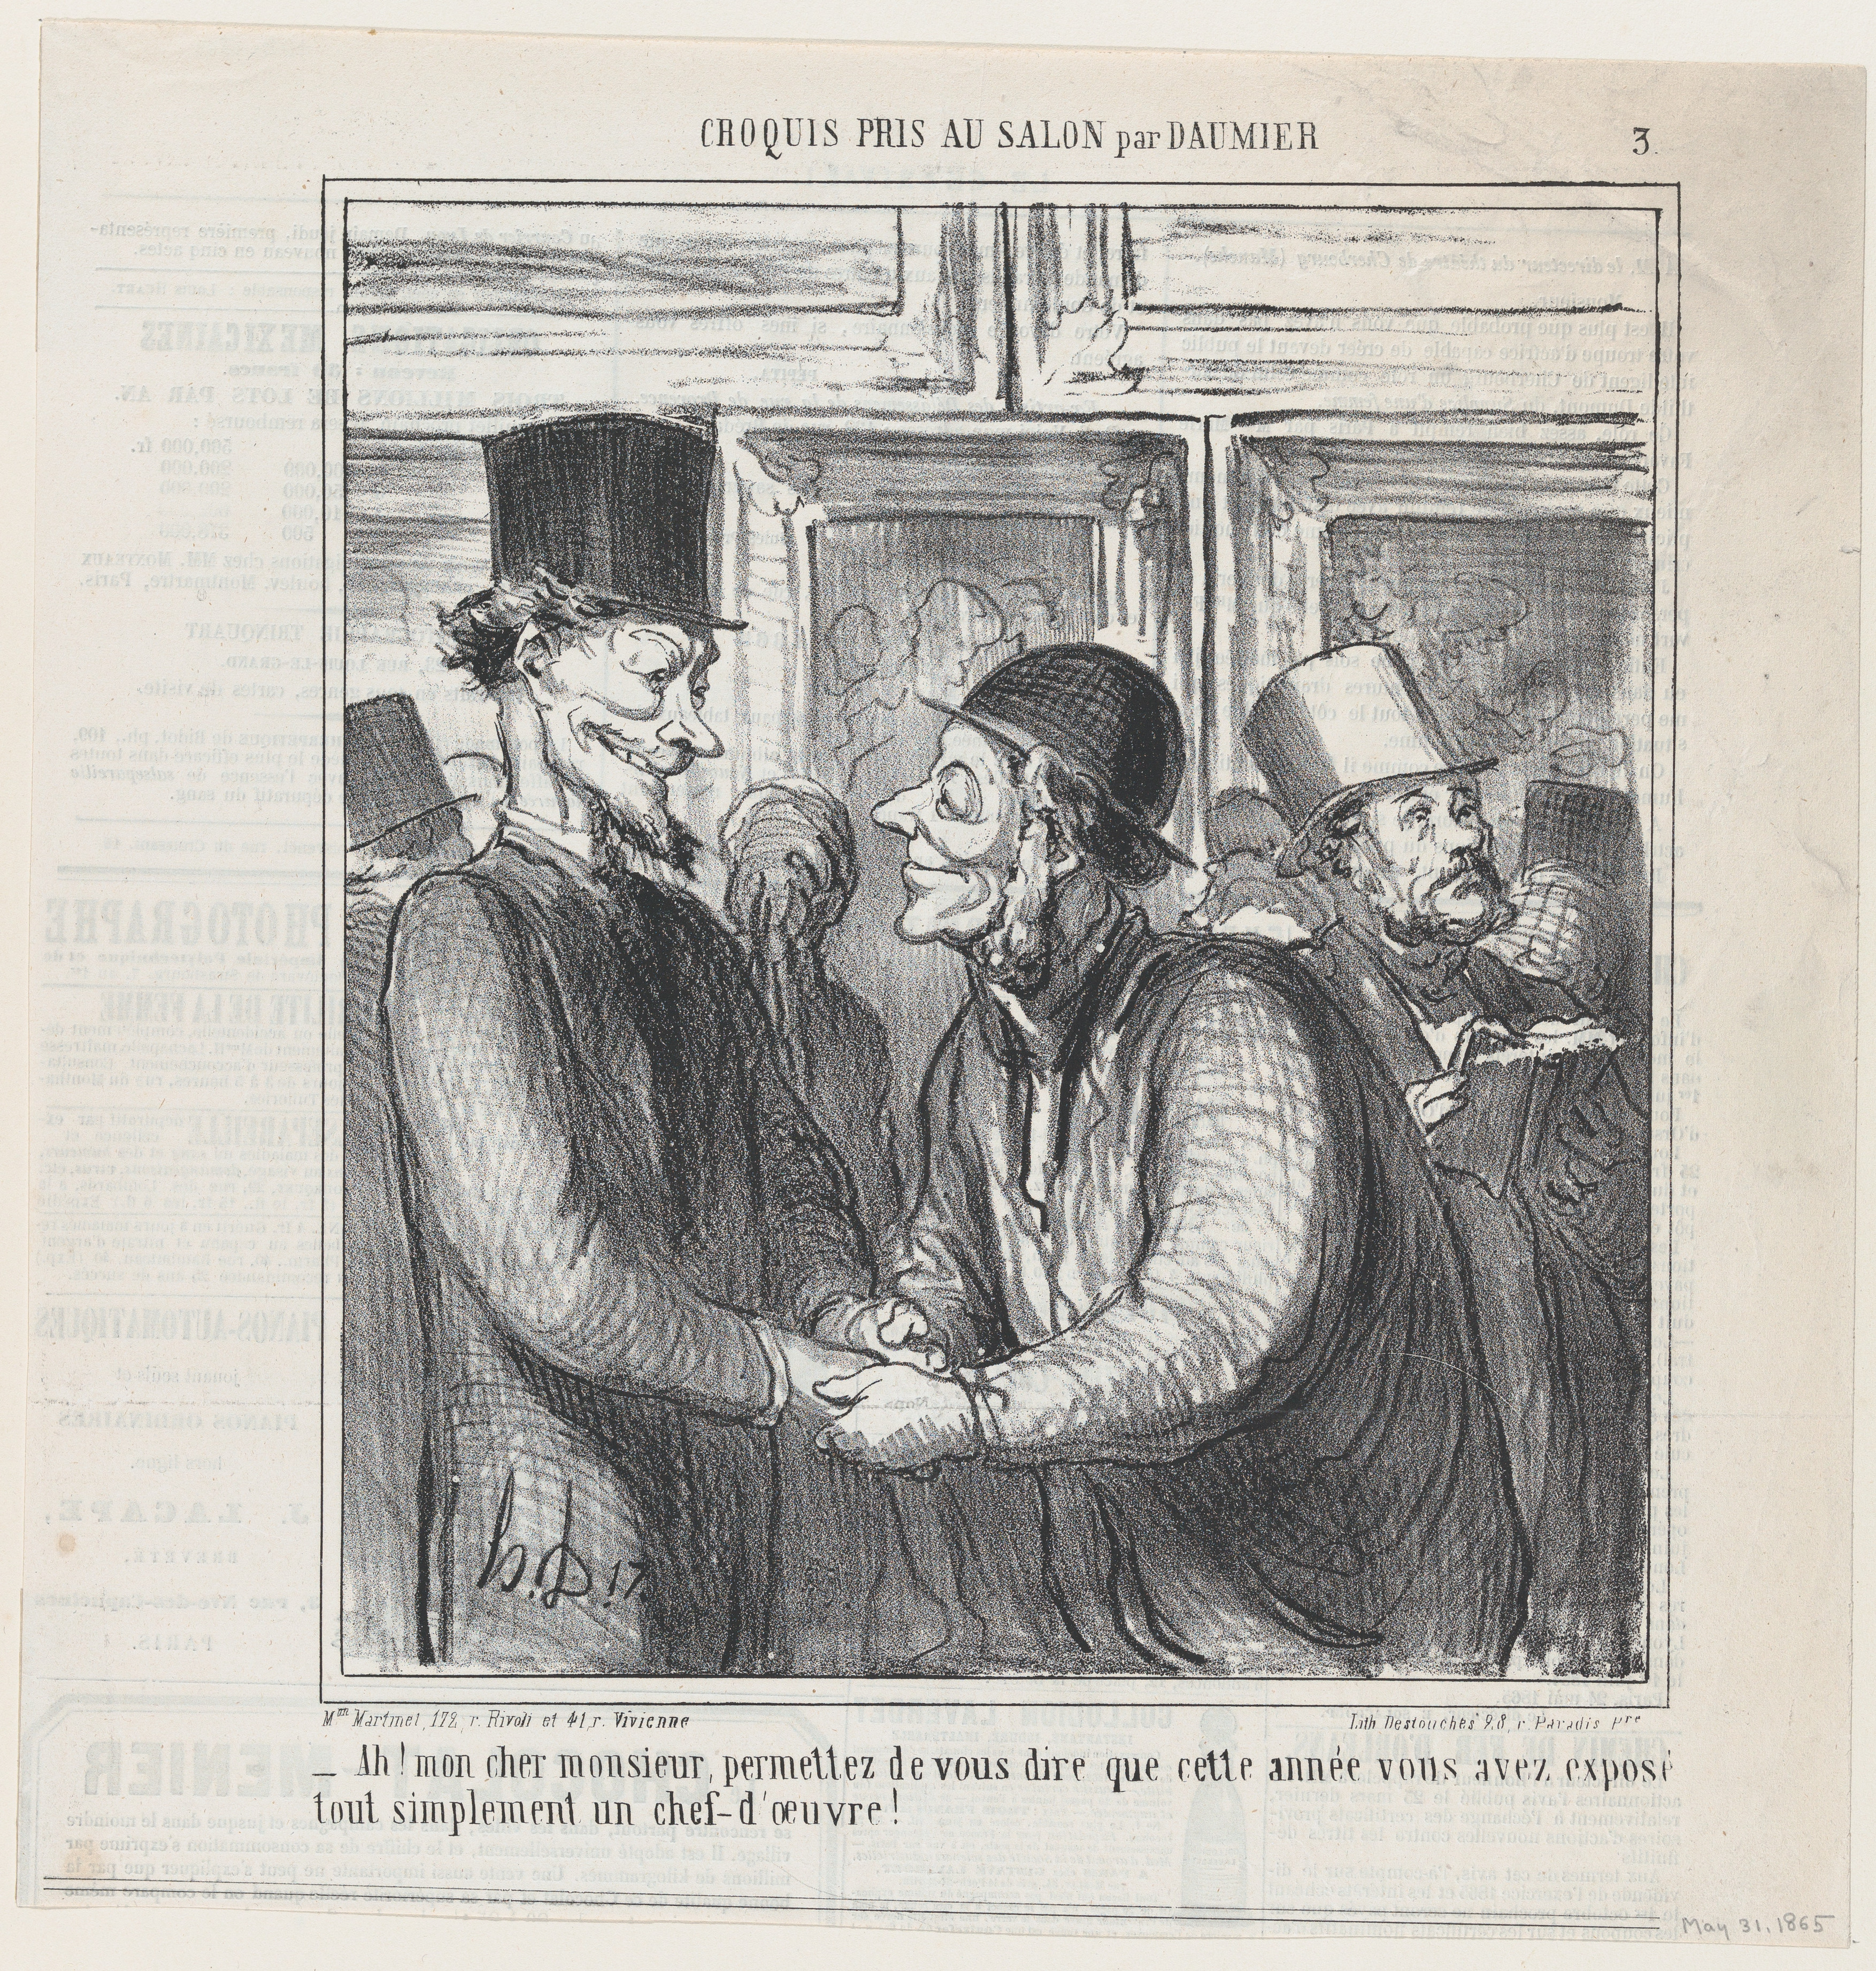 Salon,\' allow quite in this that you exhibited my have masterpiece, to year you sir, | May me \'Sketches dear Ah, a from Charivari, the Le from Honoré simply Daumier tell published